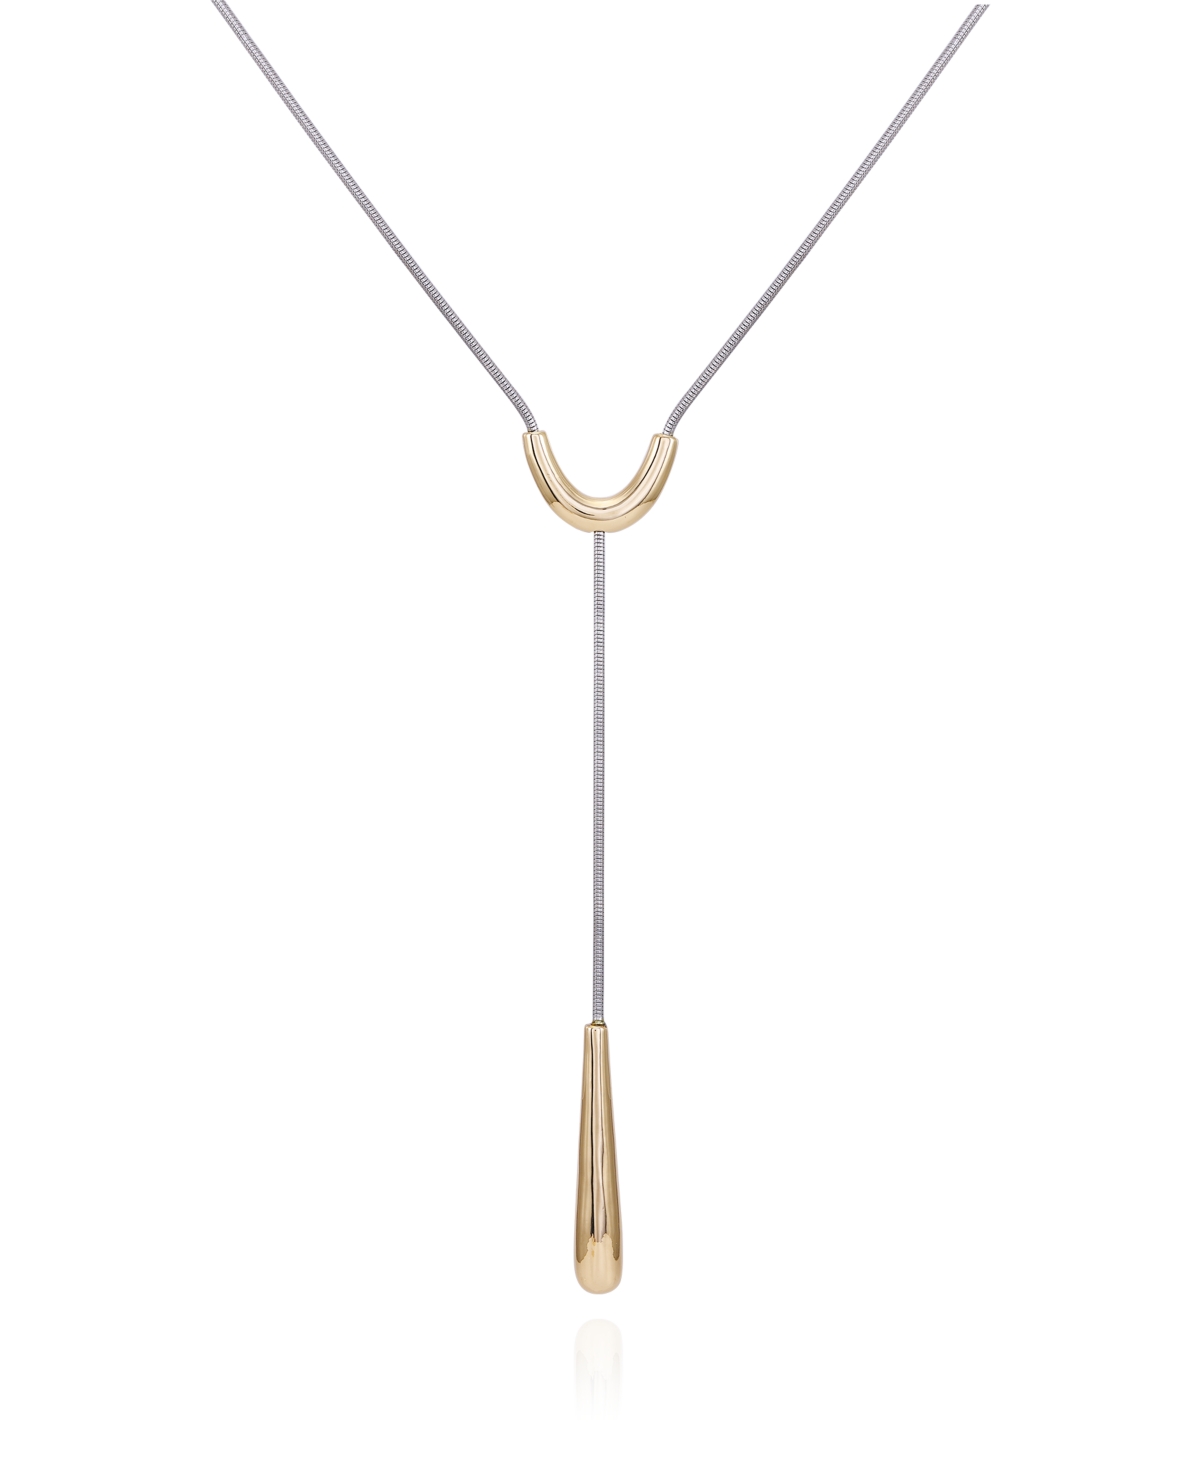 Two-Tone Long Y Necklace, 24" + 2" Extension - Gold